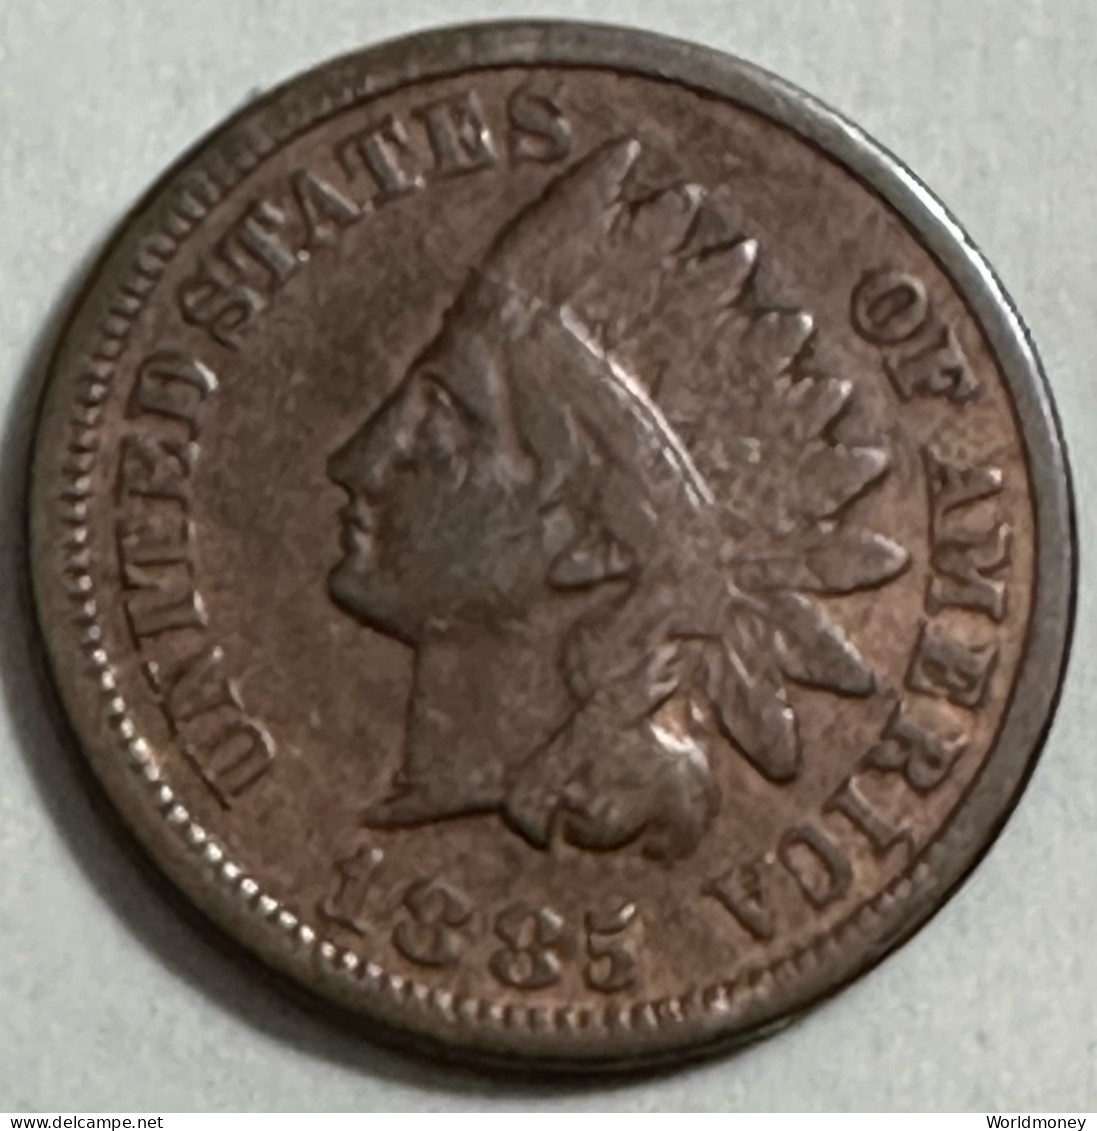 United States 1 Cent 1885 - 1859-1909: Indian Head